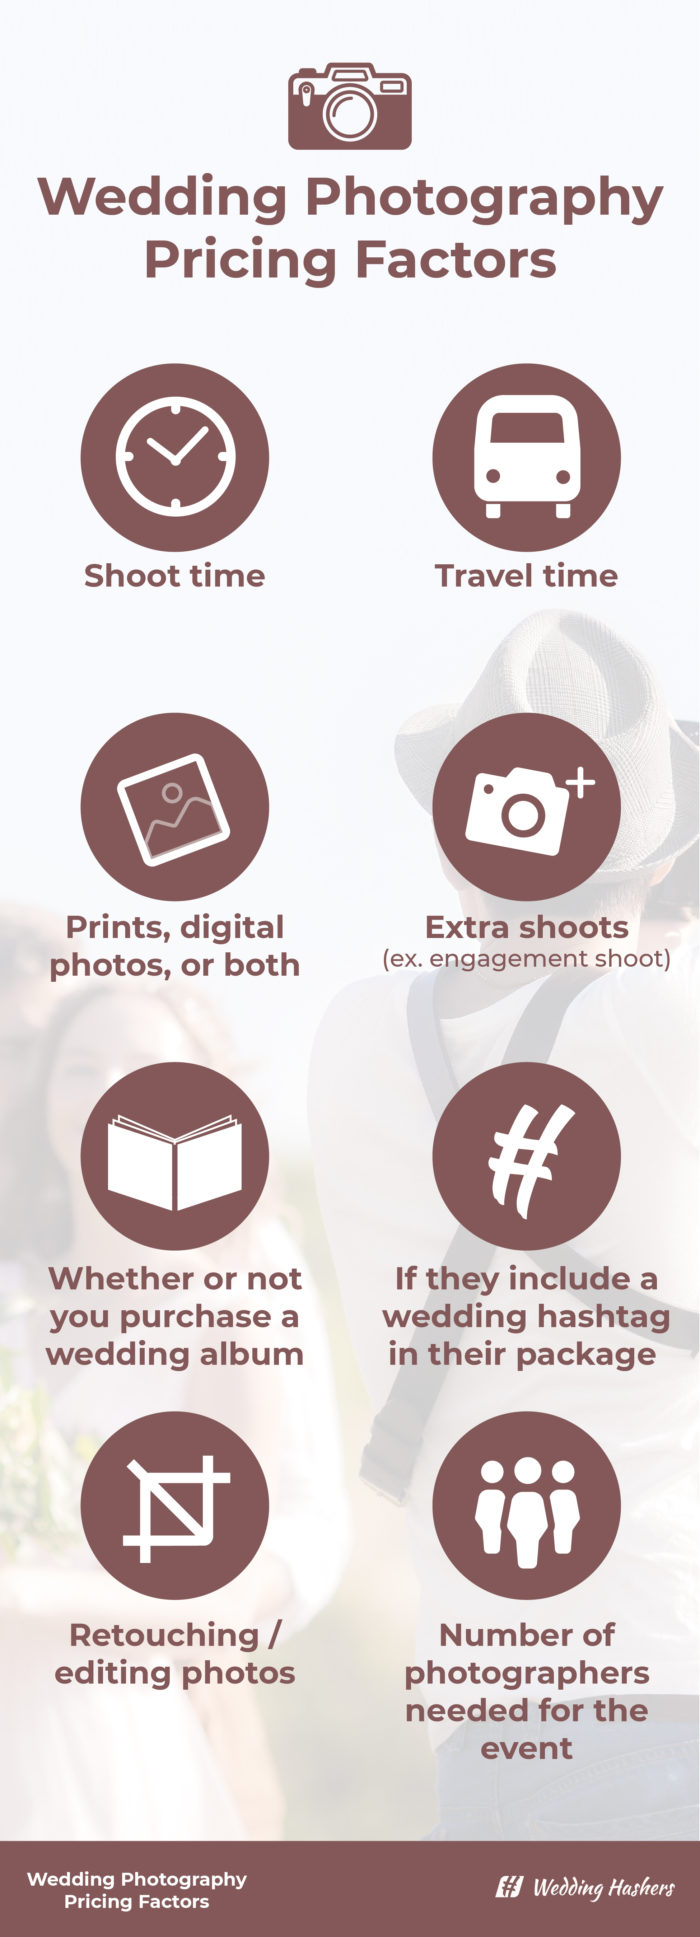 how much does a wedding photographer cost: infographic